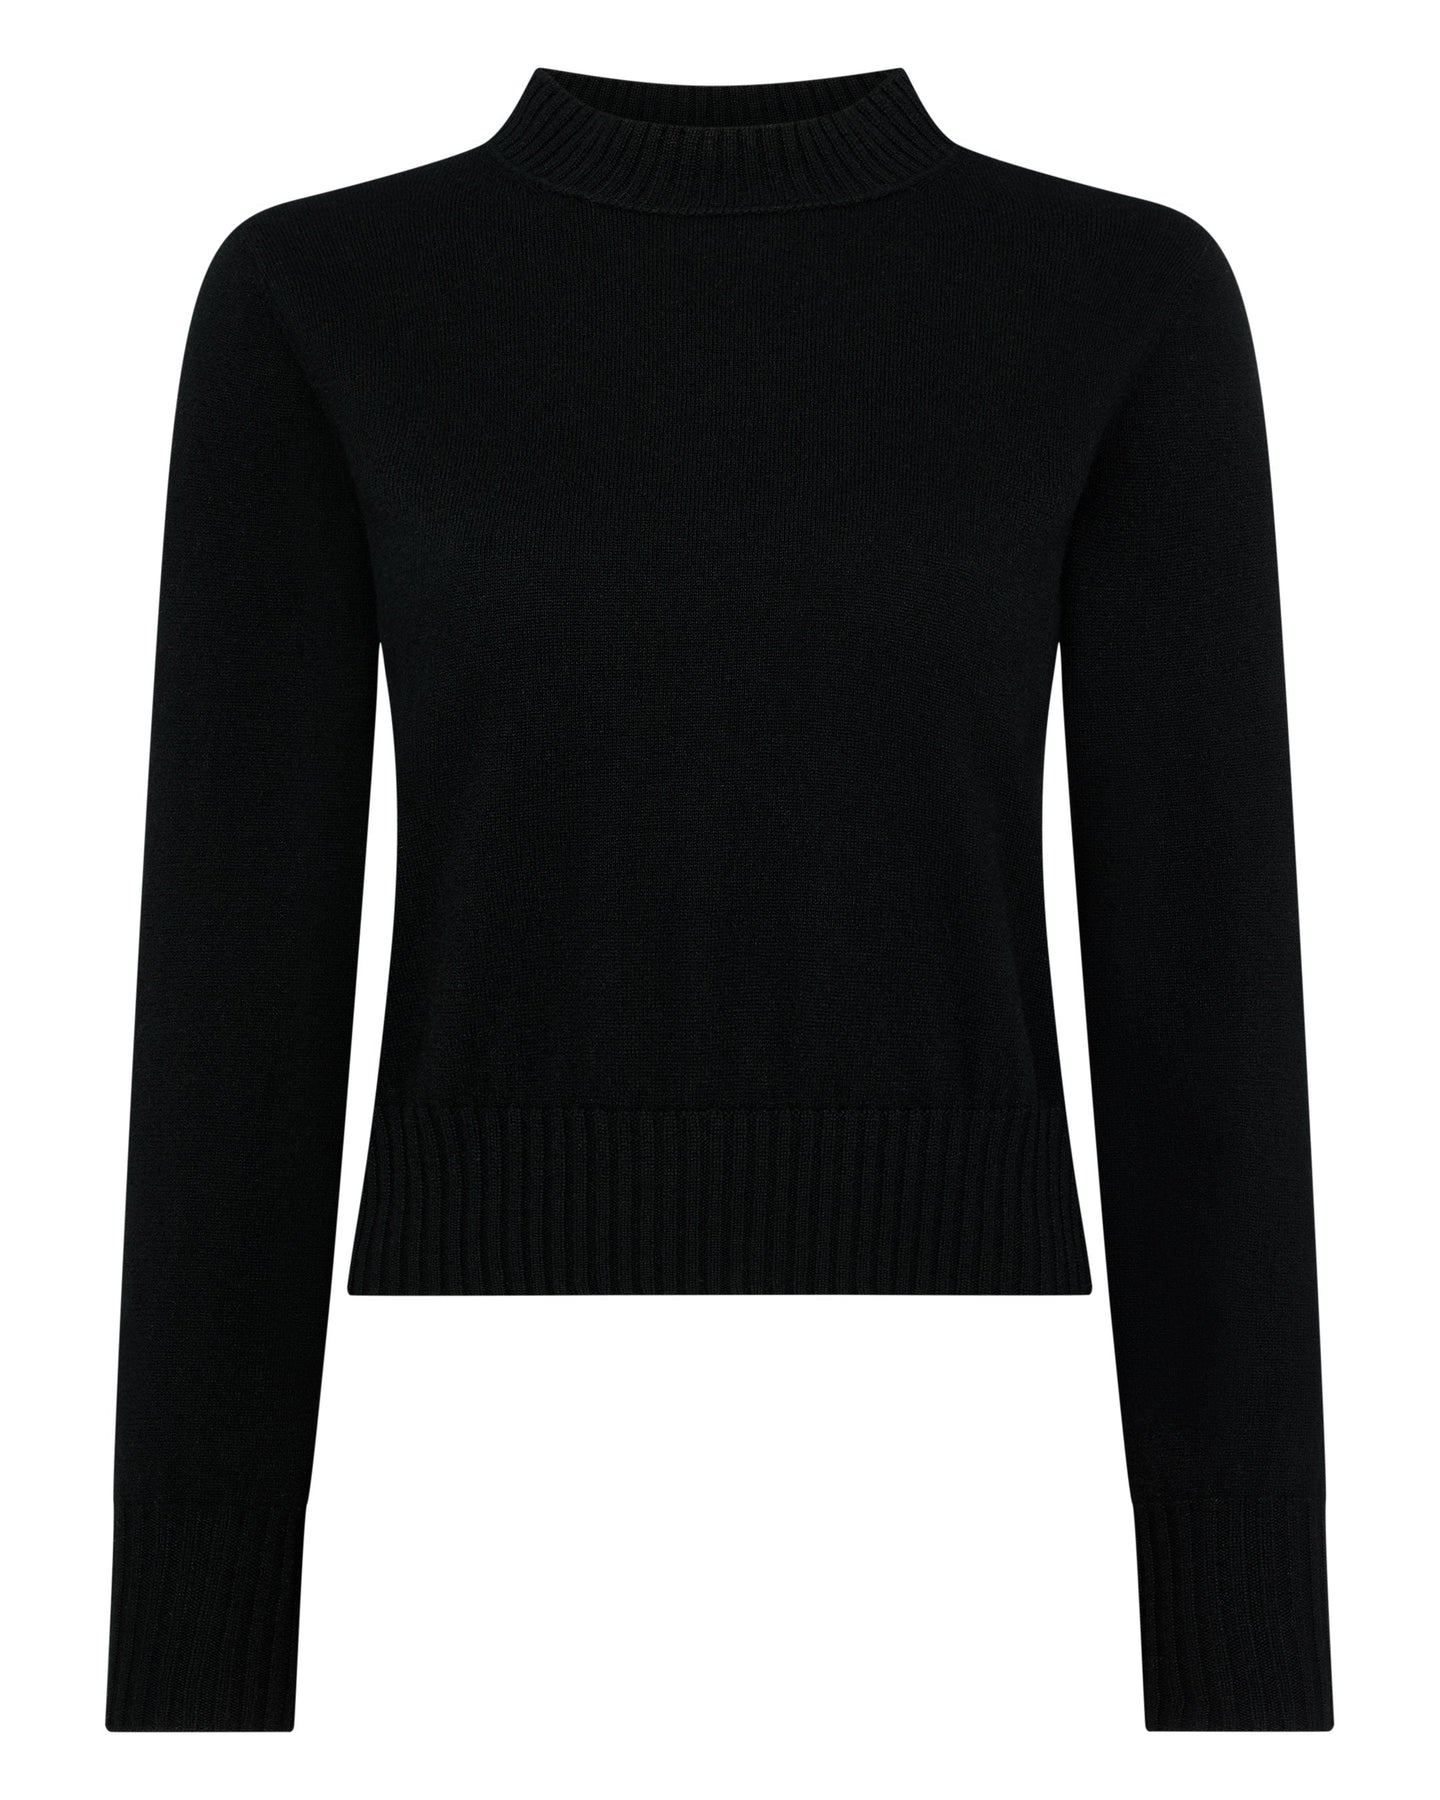 N.Peal Women's Crop Fitted Cashmere Jumper Black